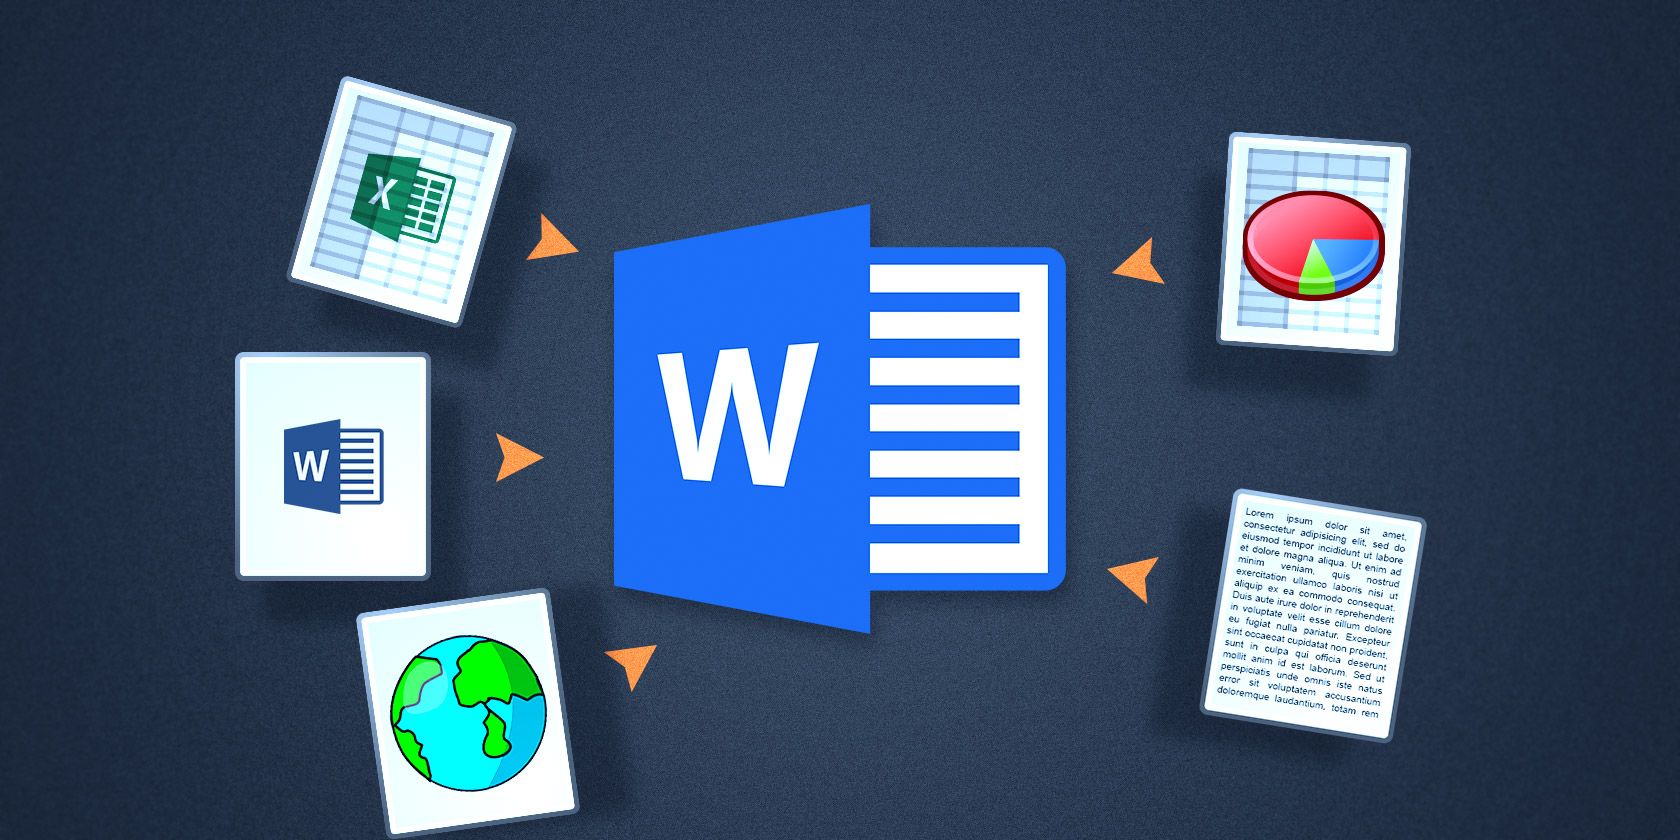 Microsoft Word logo with other files